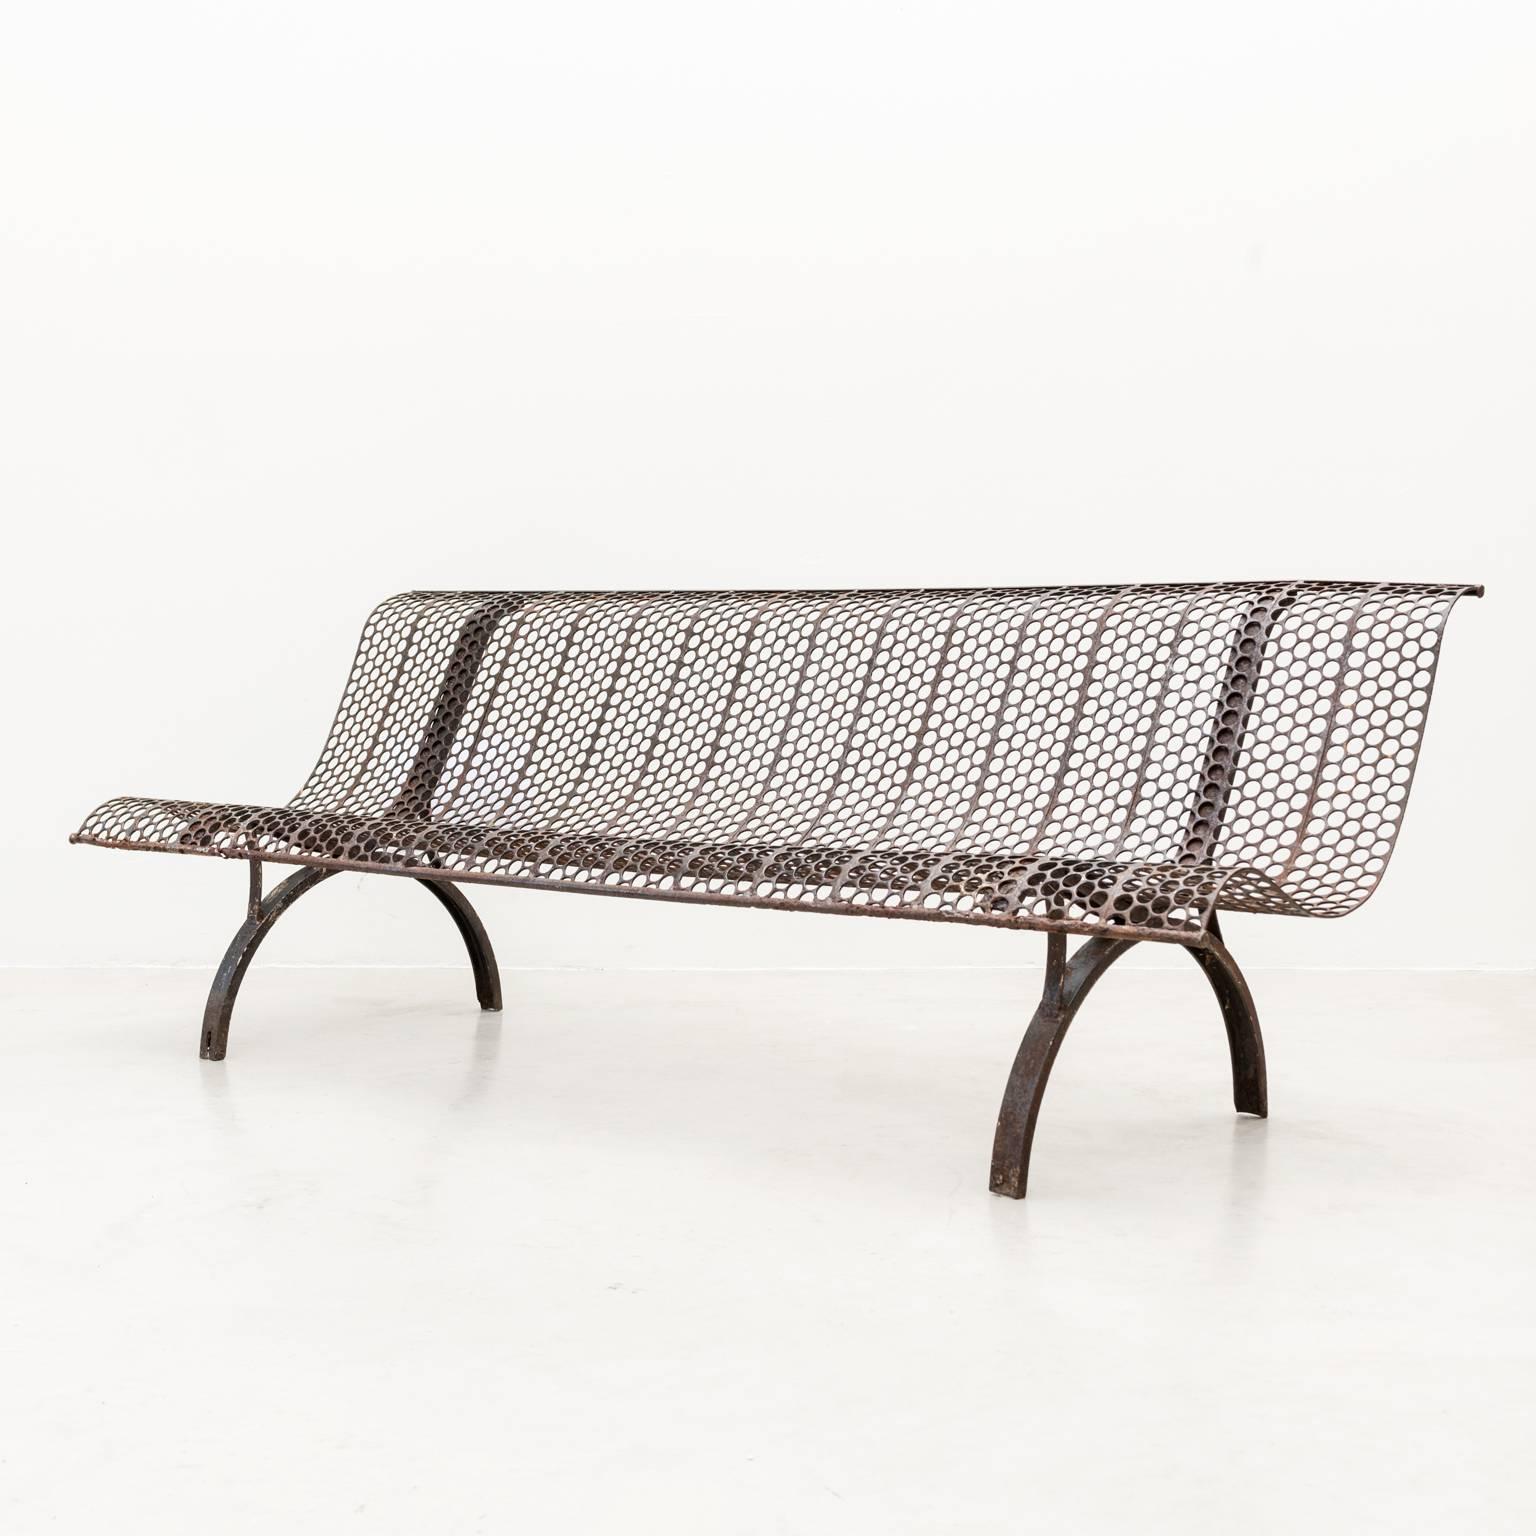 A classic wrought iron park bench from Paris, France, mid-20th century.